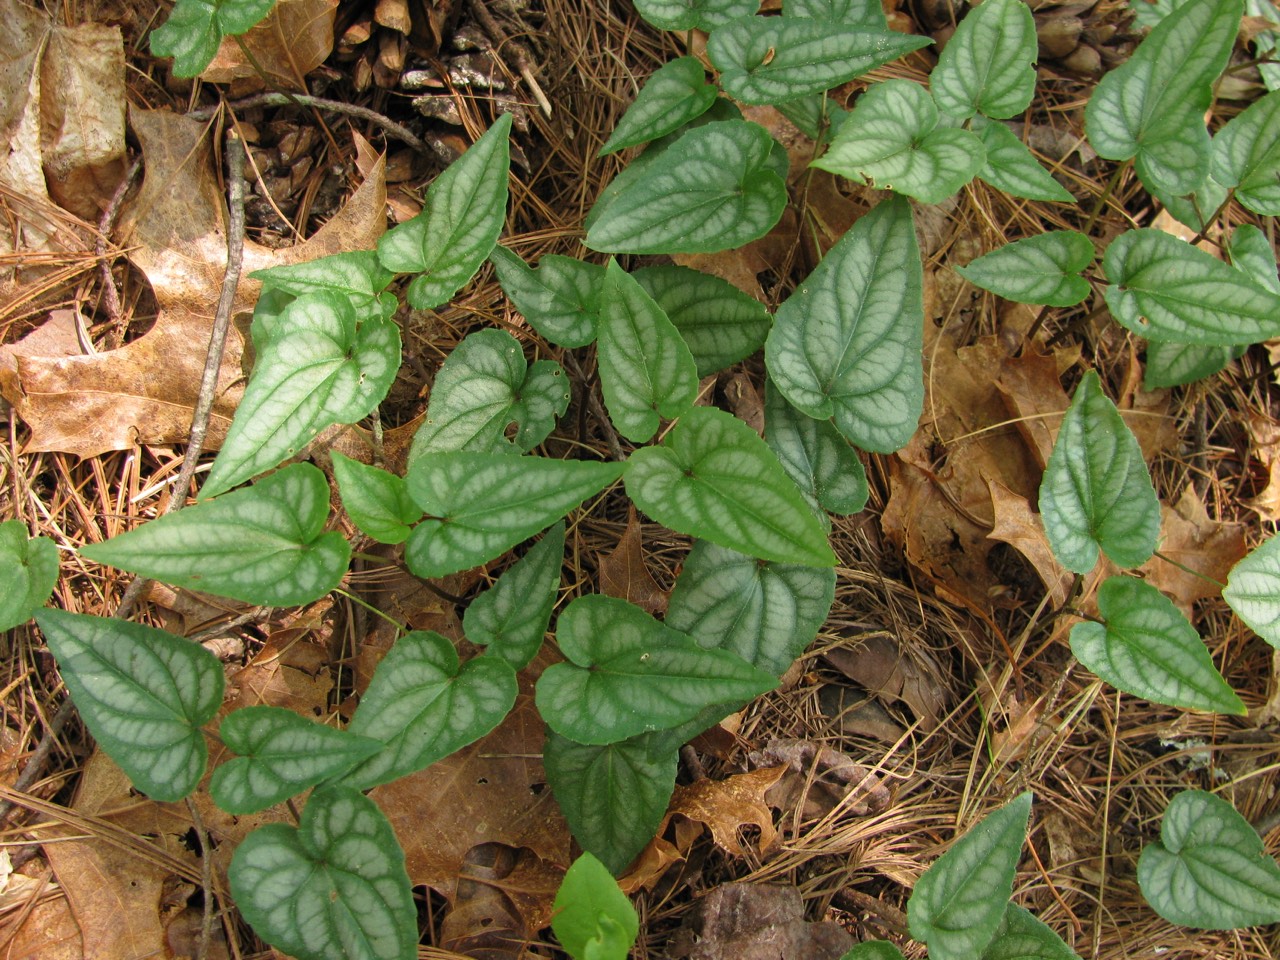 The Scientific Name is Viola hastata. You will likely hear them called Spearleaf Violet, Silverleaf Violet, Halberd-leaf Violet, Halberd-leaved Yellow Violet.. This picture shows the Variegated hastate shaped leaves of Viola hastata